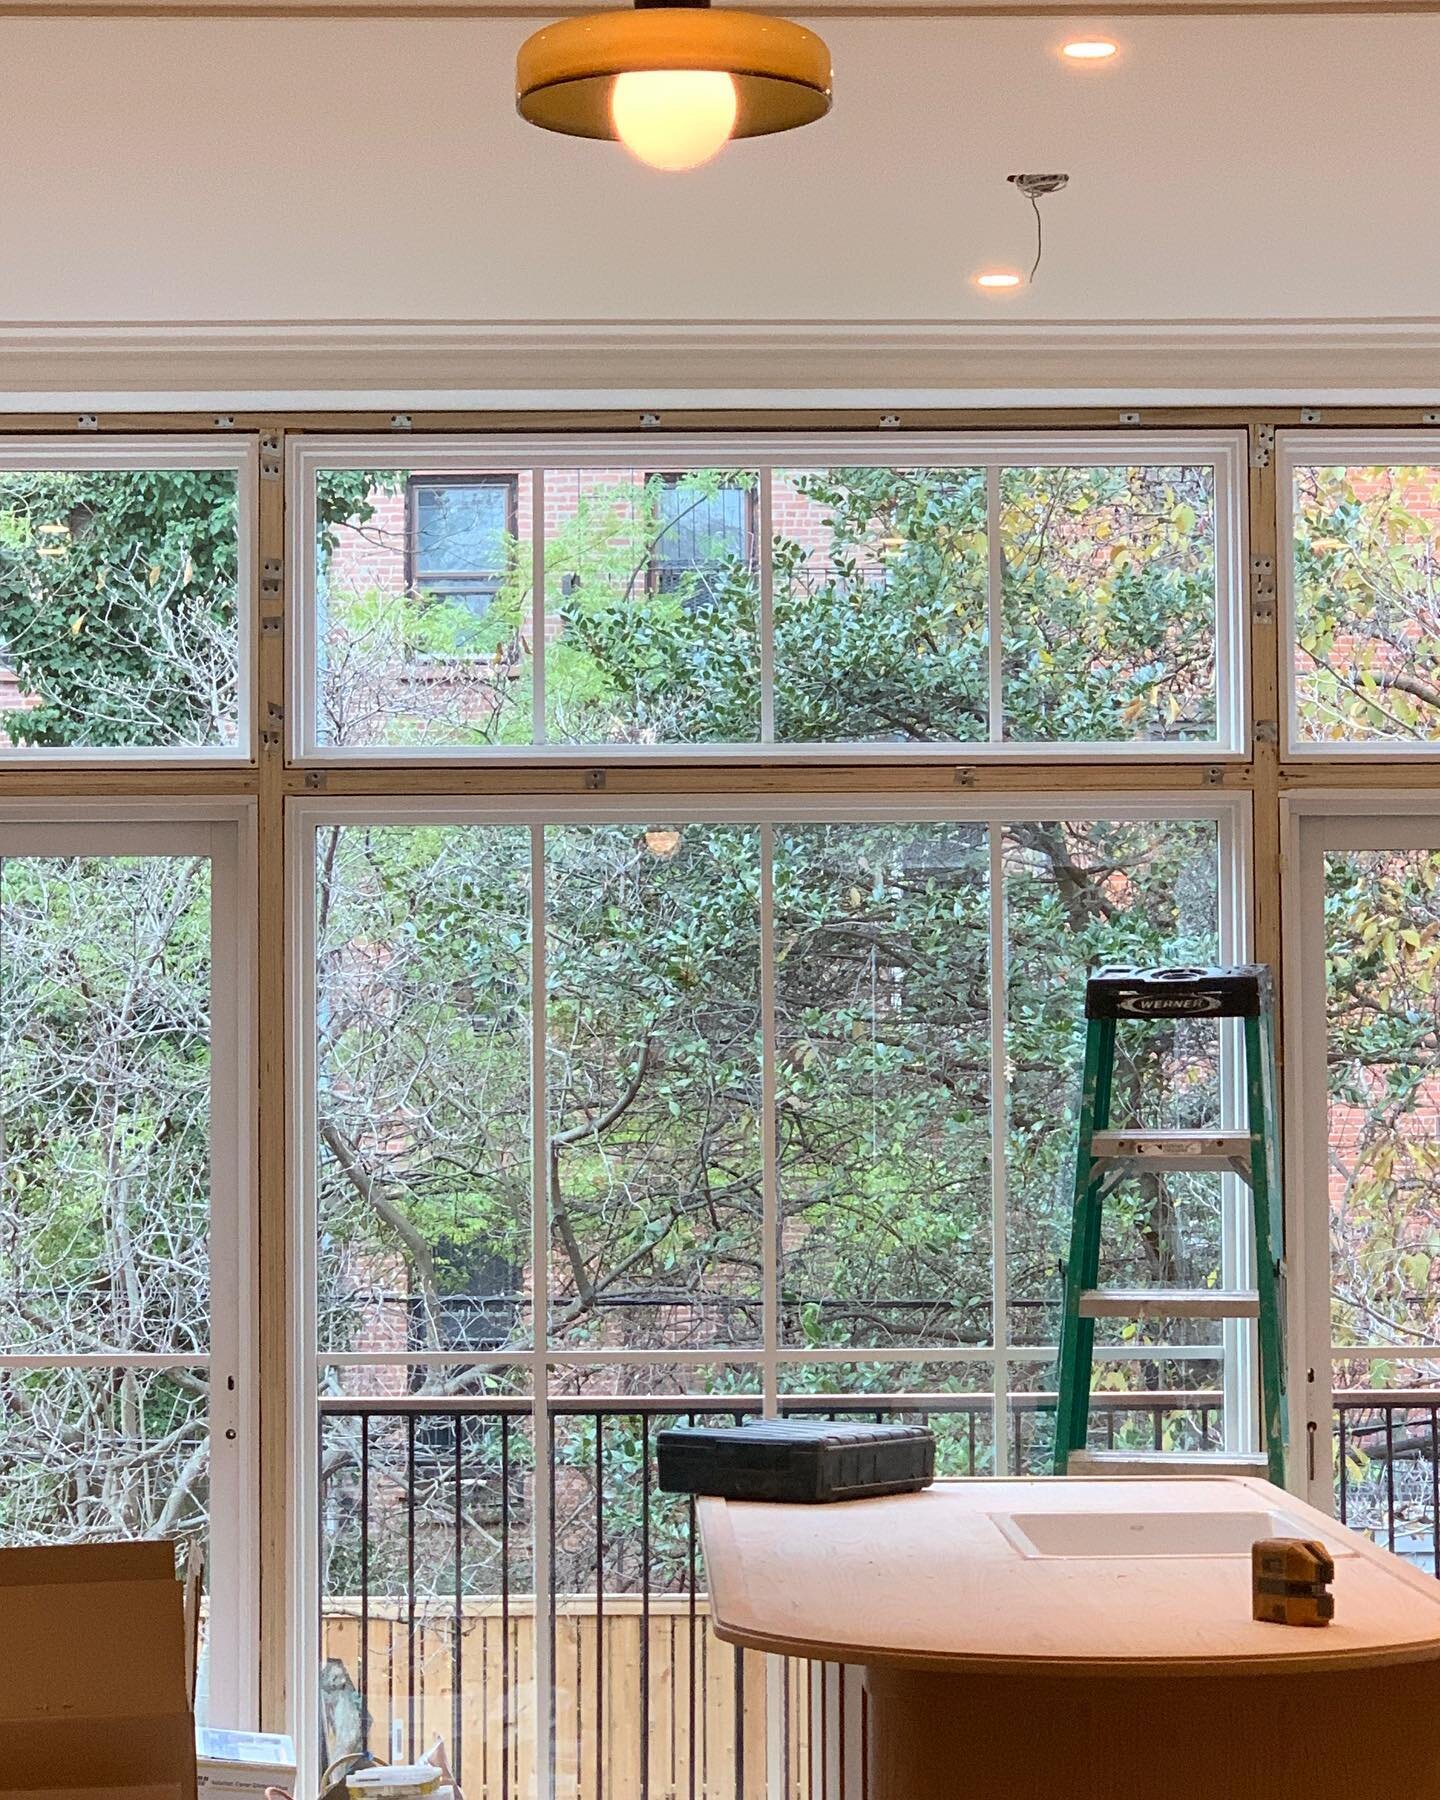 28 weeks later ! #windows 
More images of the project in process in stories
.
.
.
.
.
.
.
.
.
.
.

#kitchenview #insideoutside #roomwithaview #brick #windowwall #gardendesign #pendantlights #interiordesign #renovation #brooklyntownhouse #brooklyndesi